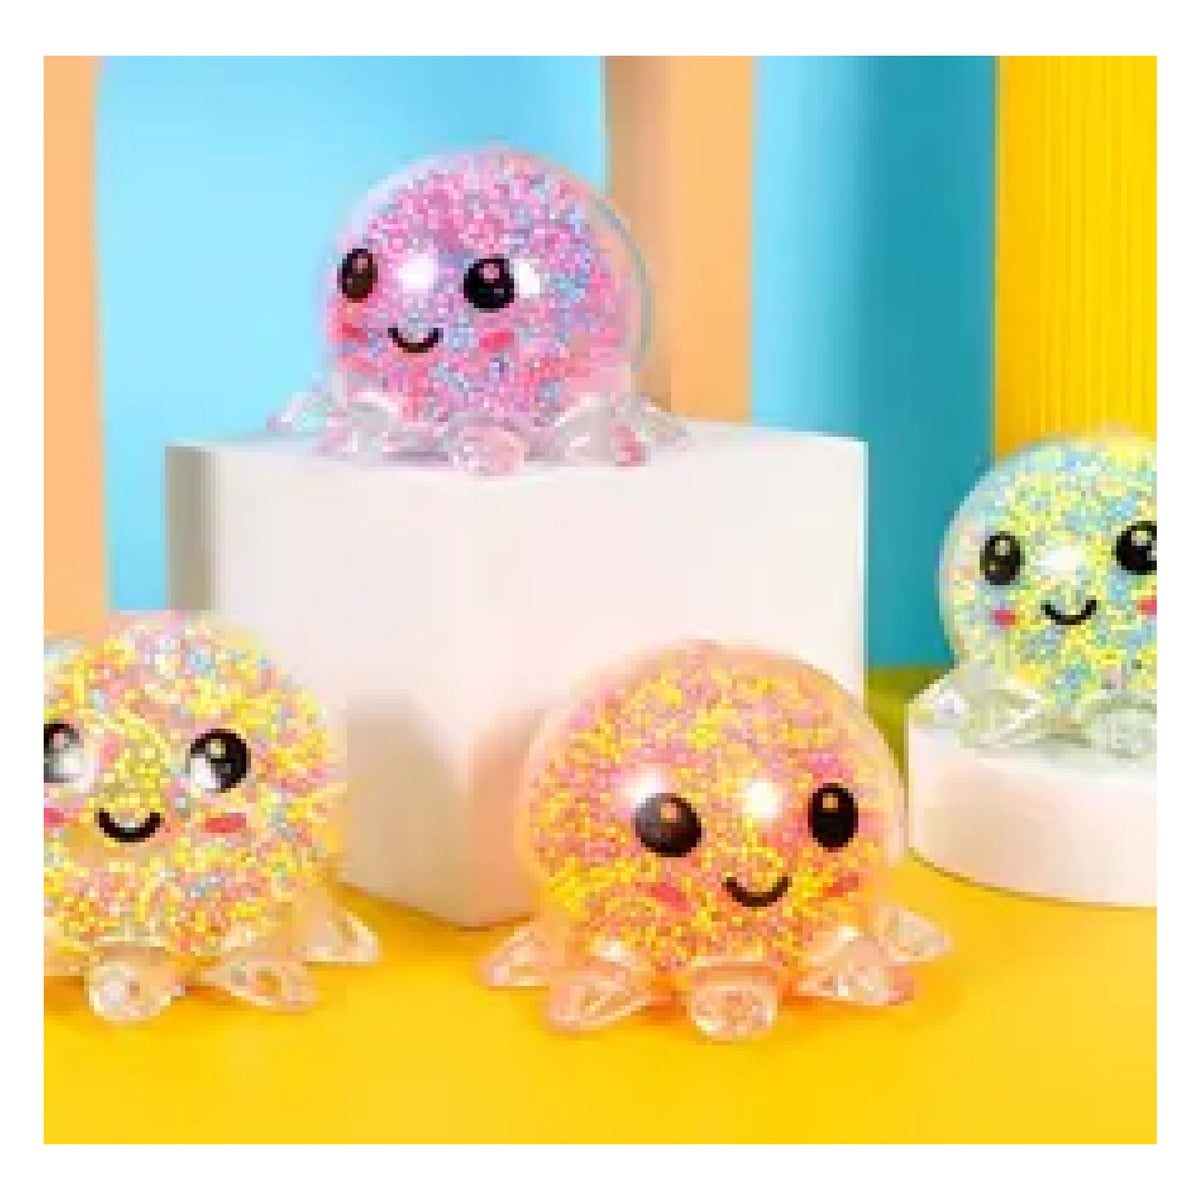 Happy Octopus Design Light Up Jelly Bead Assorted Stress Toy (Sold by DZ)